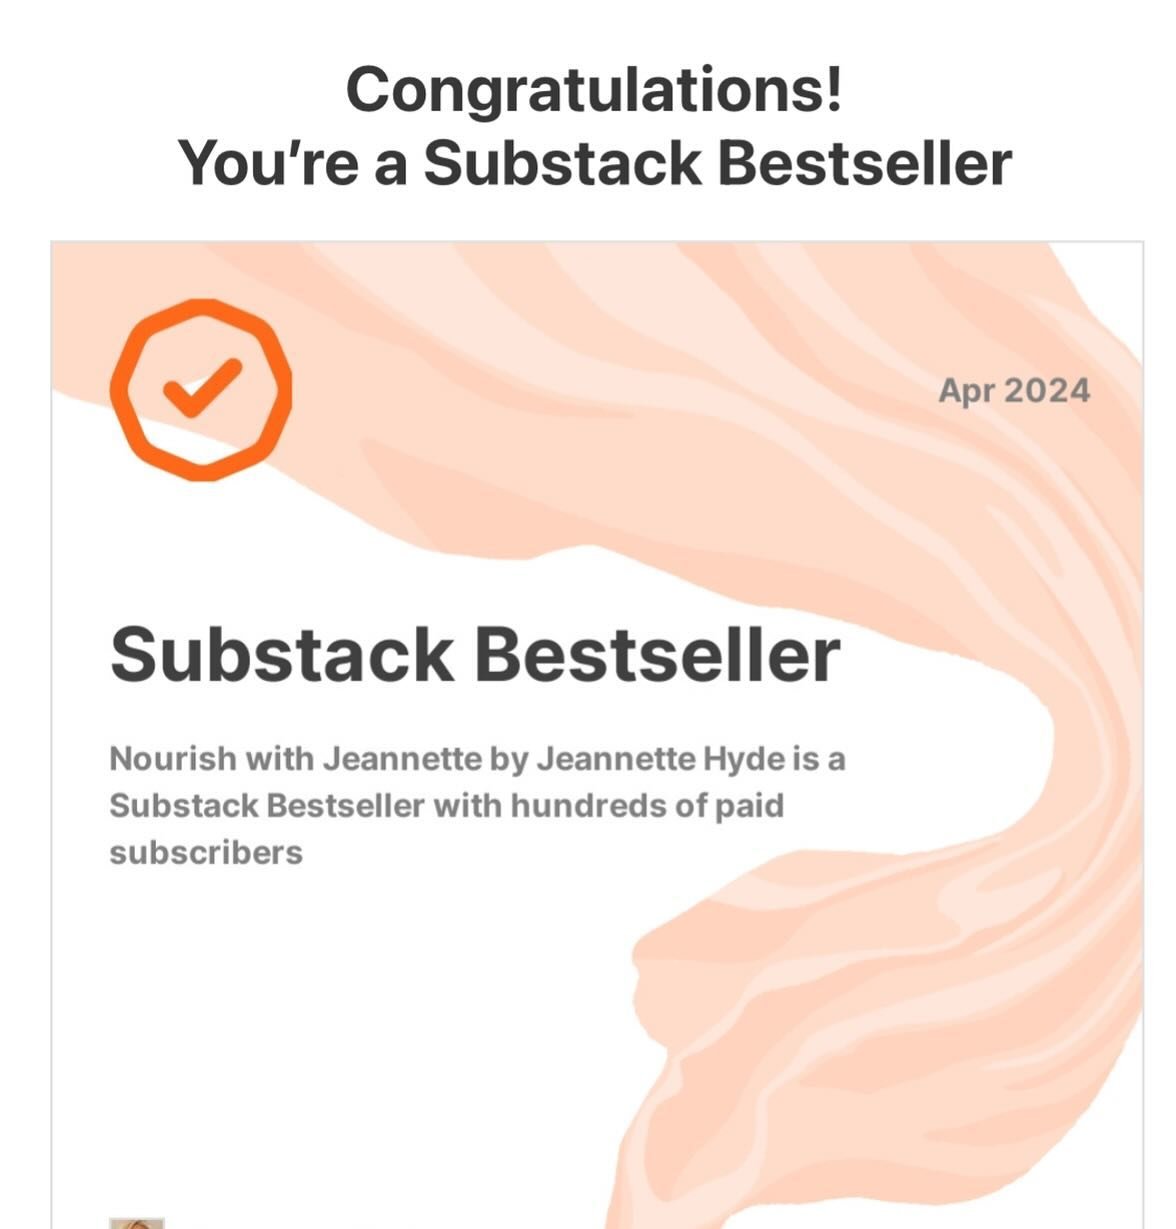 🙏 Thank you everyone who has made this happen&hellip; 

🙁There have been many times over the last 7 months when I felt like giving up. 

✅ When people pay for your writing you know they value your work - and it also means you can keep doing it. 

❓